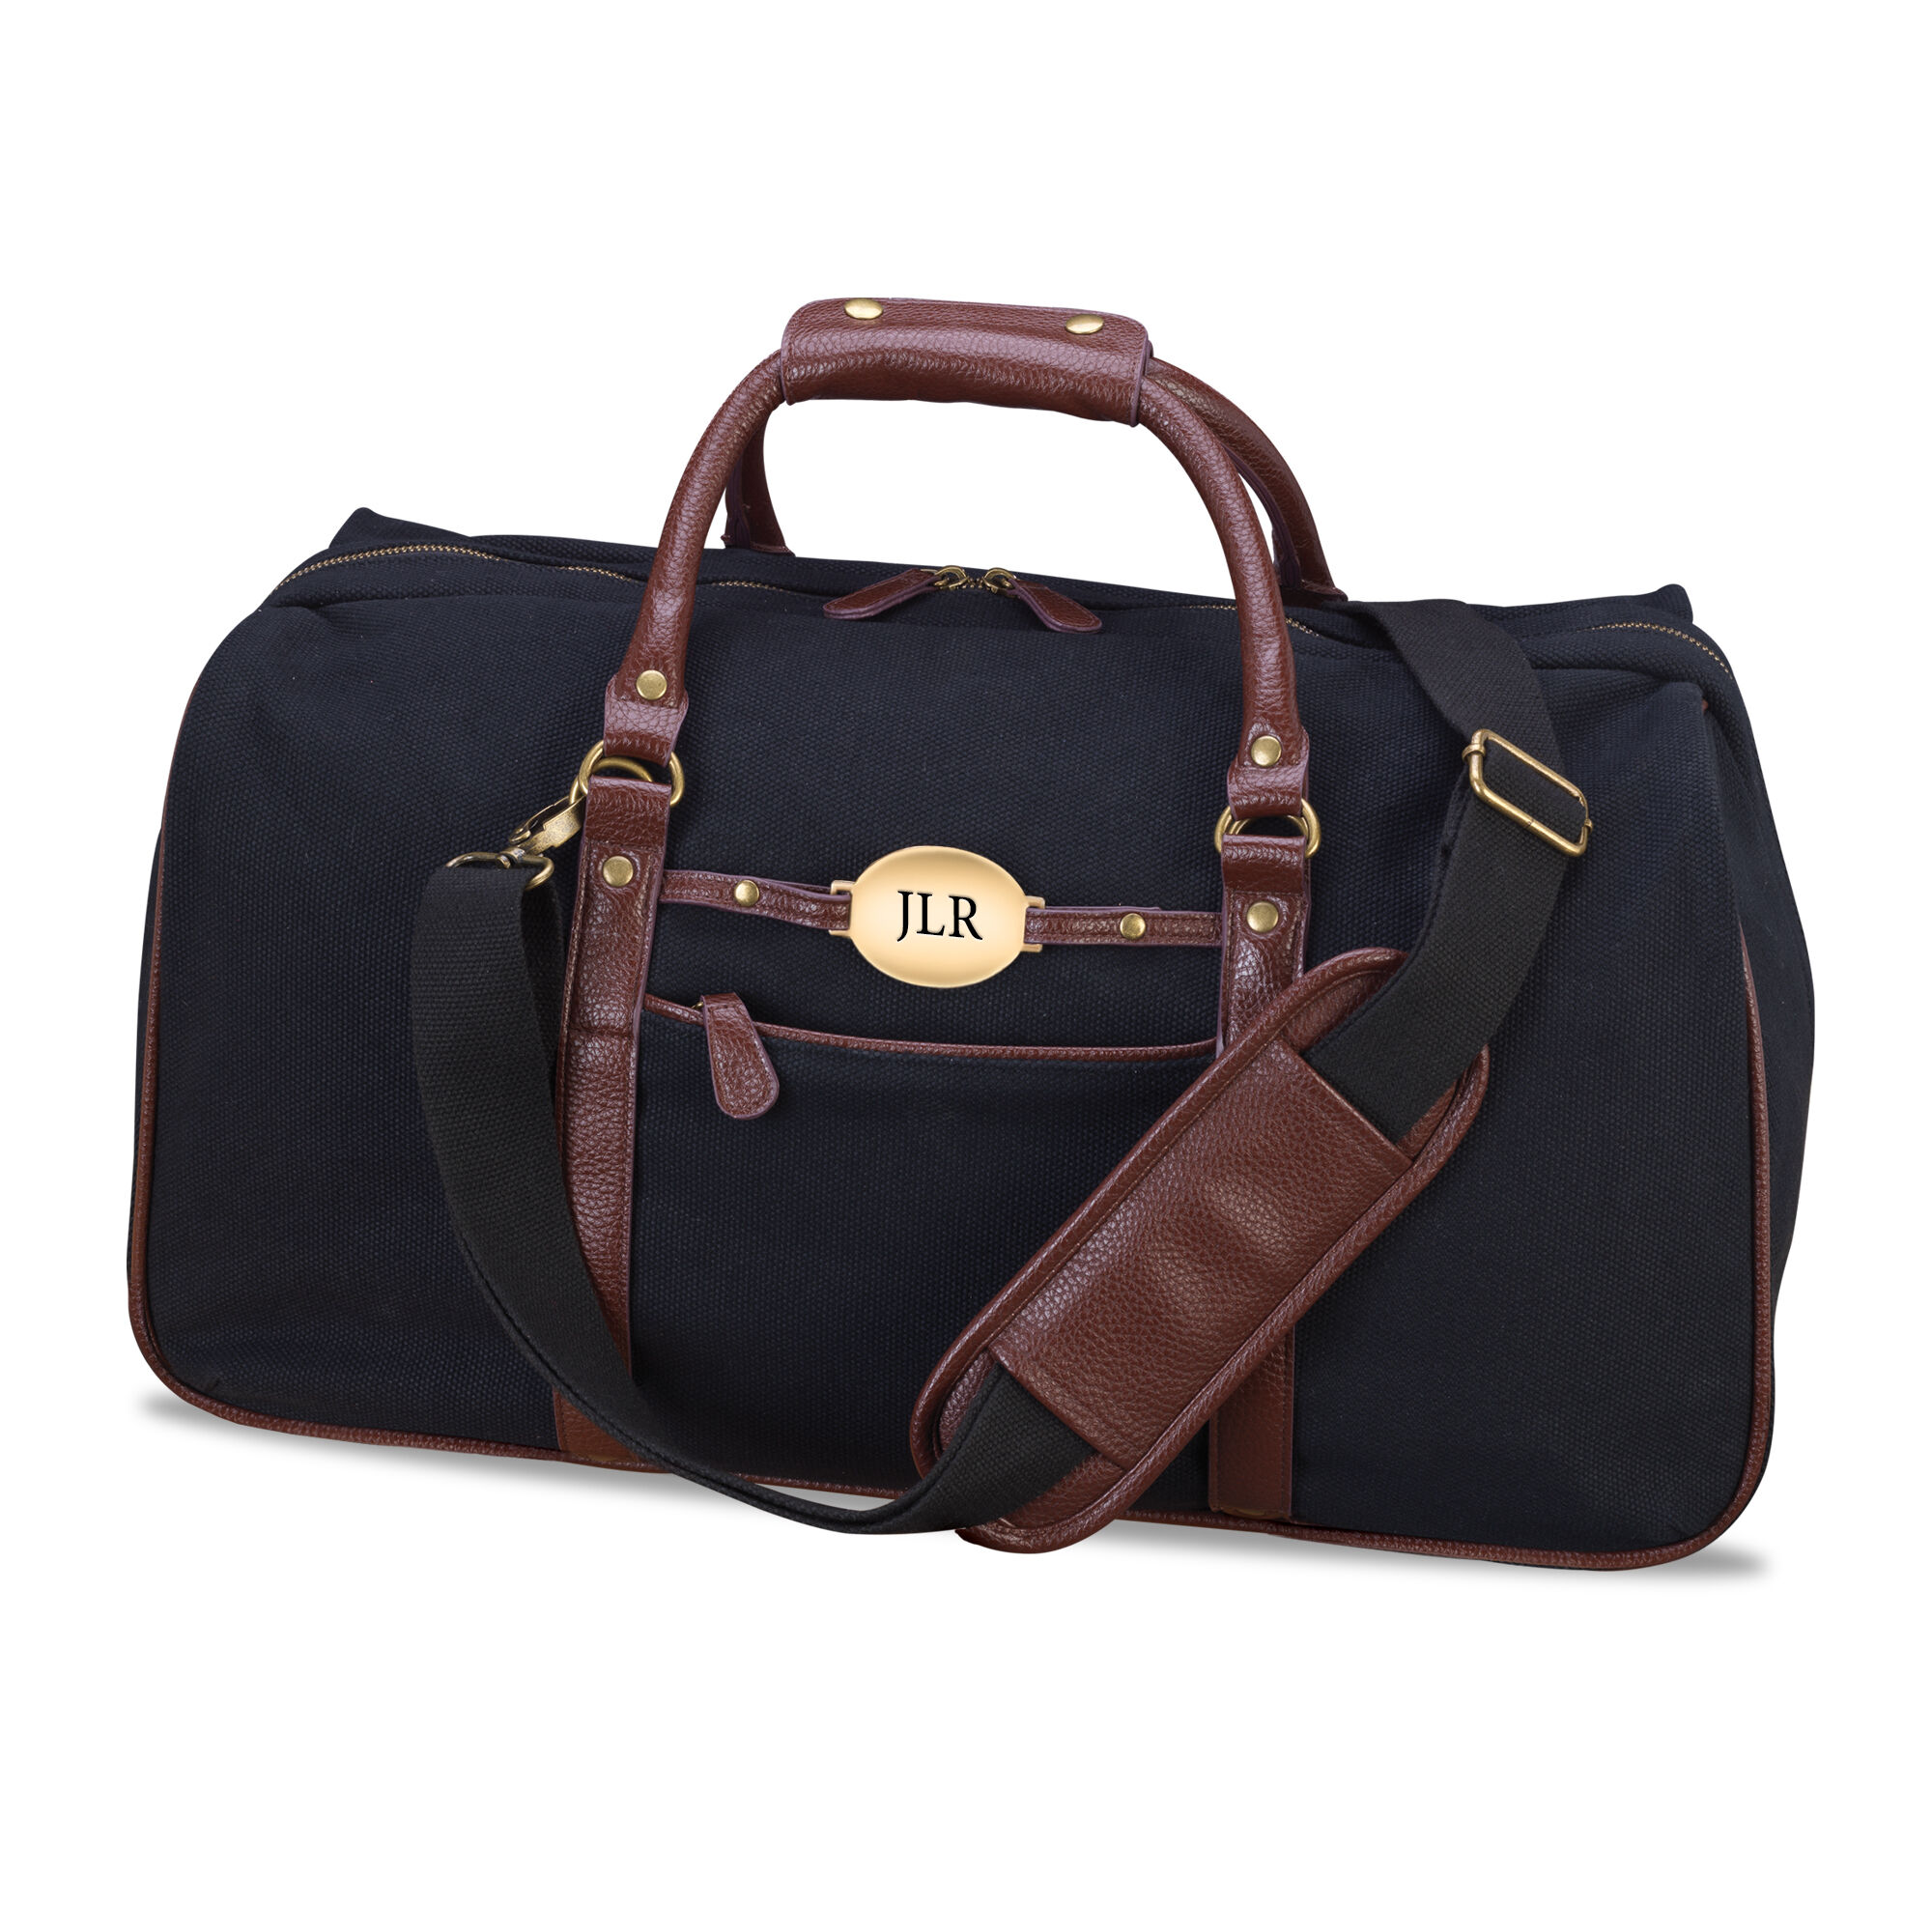 The Personalized Ultimate Duffel 0151 0015 a main